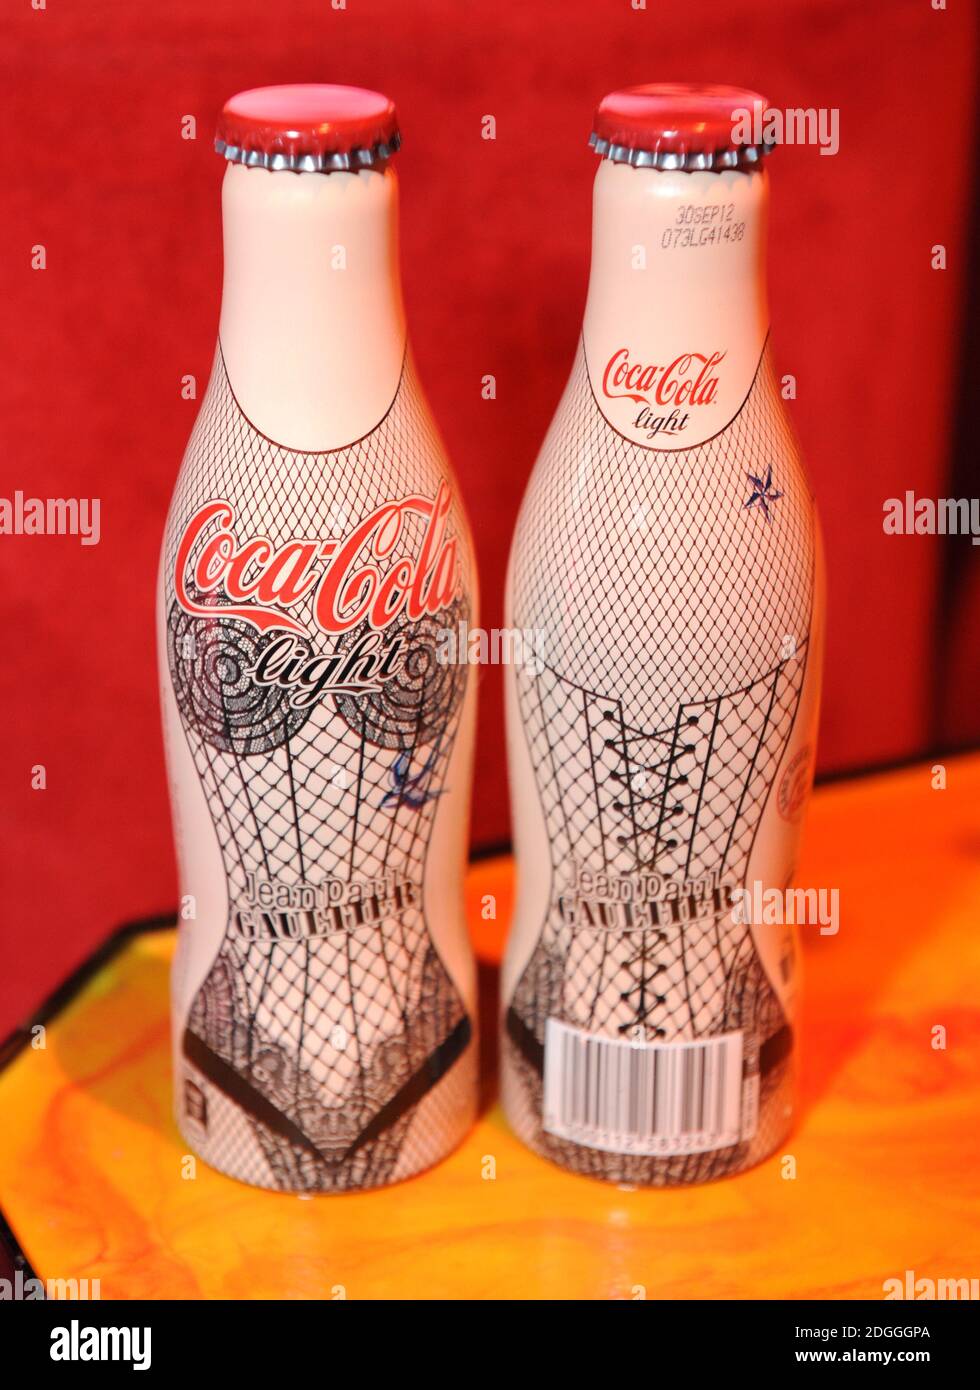 Coca-Cola light, Diet Coke and Jean Paul Gaultier launch their limited  edition bottle collection at the famous Crazy Horse in Paris. Jean Paul  Gaultier showed his new designs and campaign for Coca-Cola